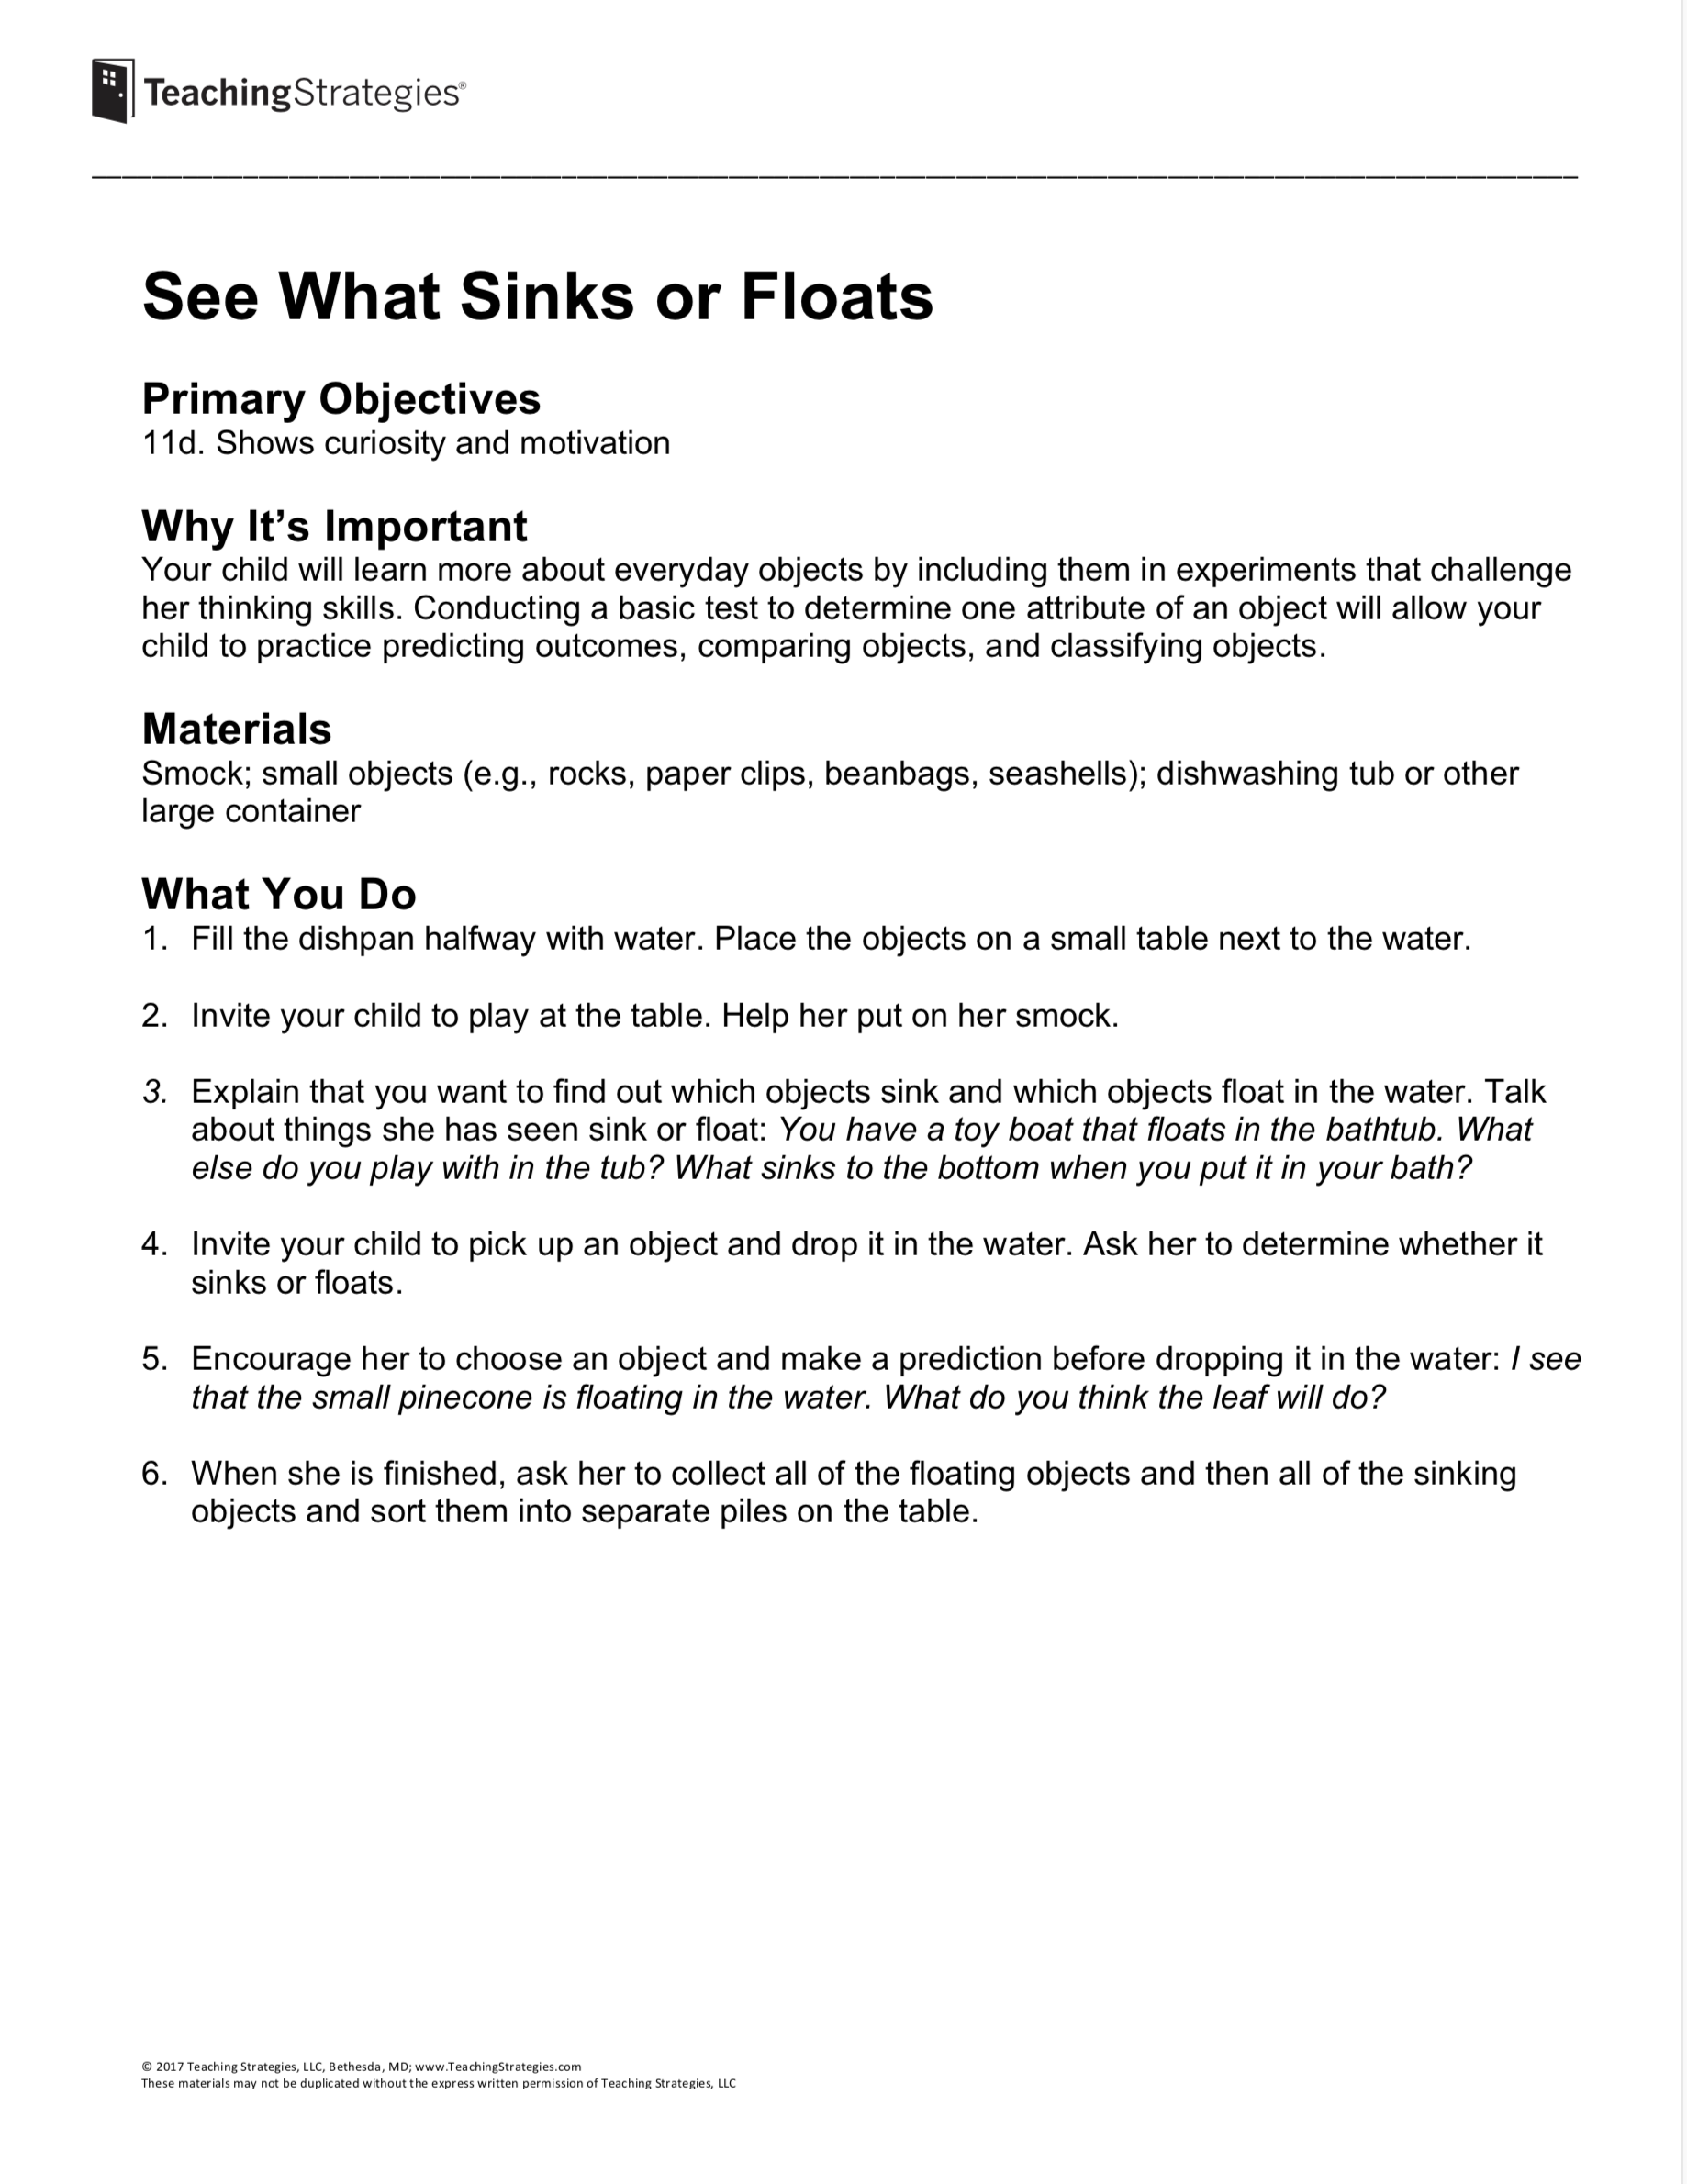 See What Sinks or Floats